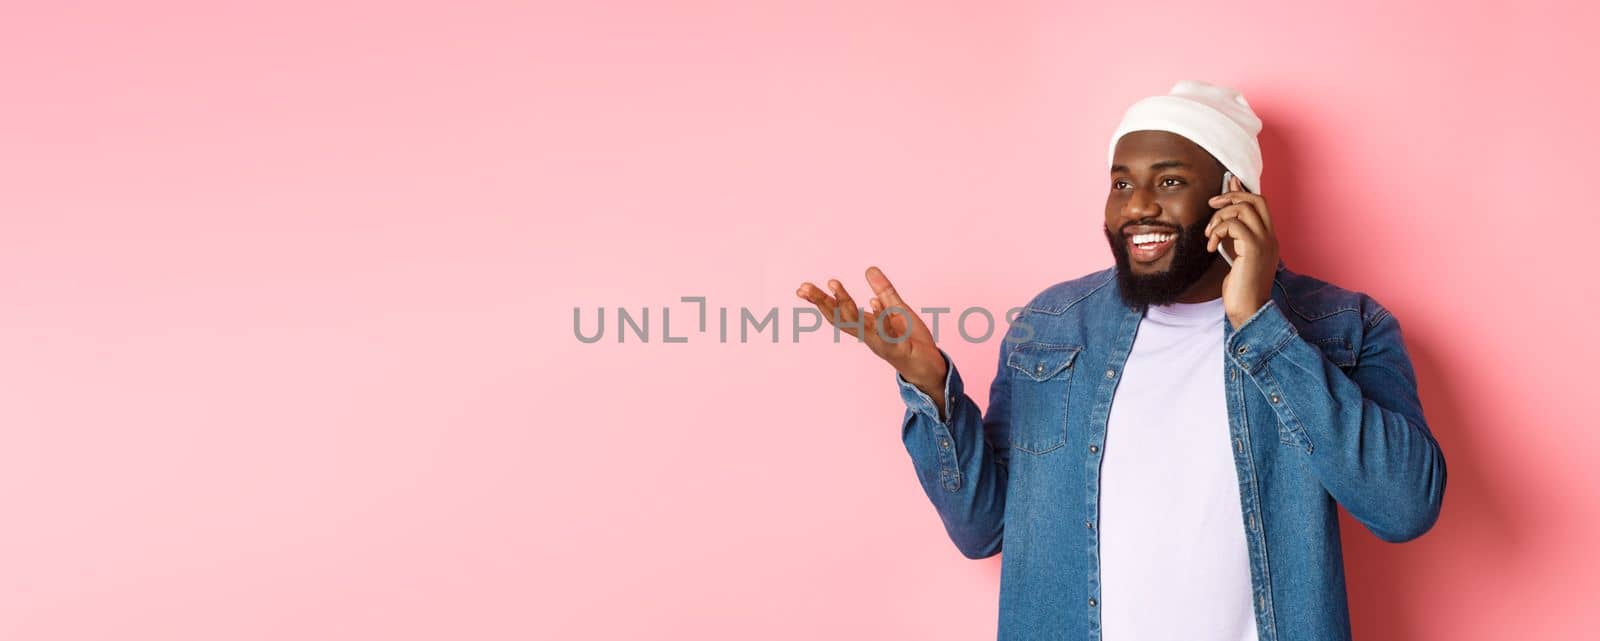 Handsome modern african-american man talking on mobile phone, smiling and discussing something, standing over pink background.